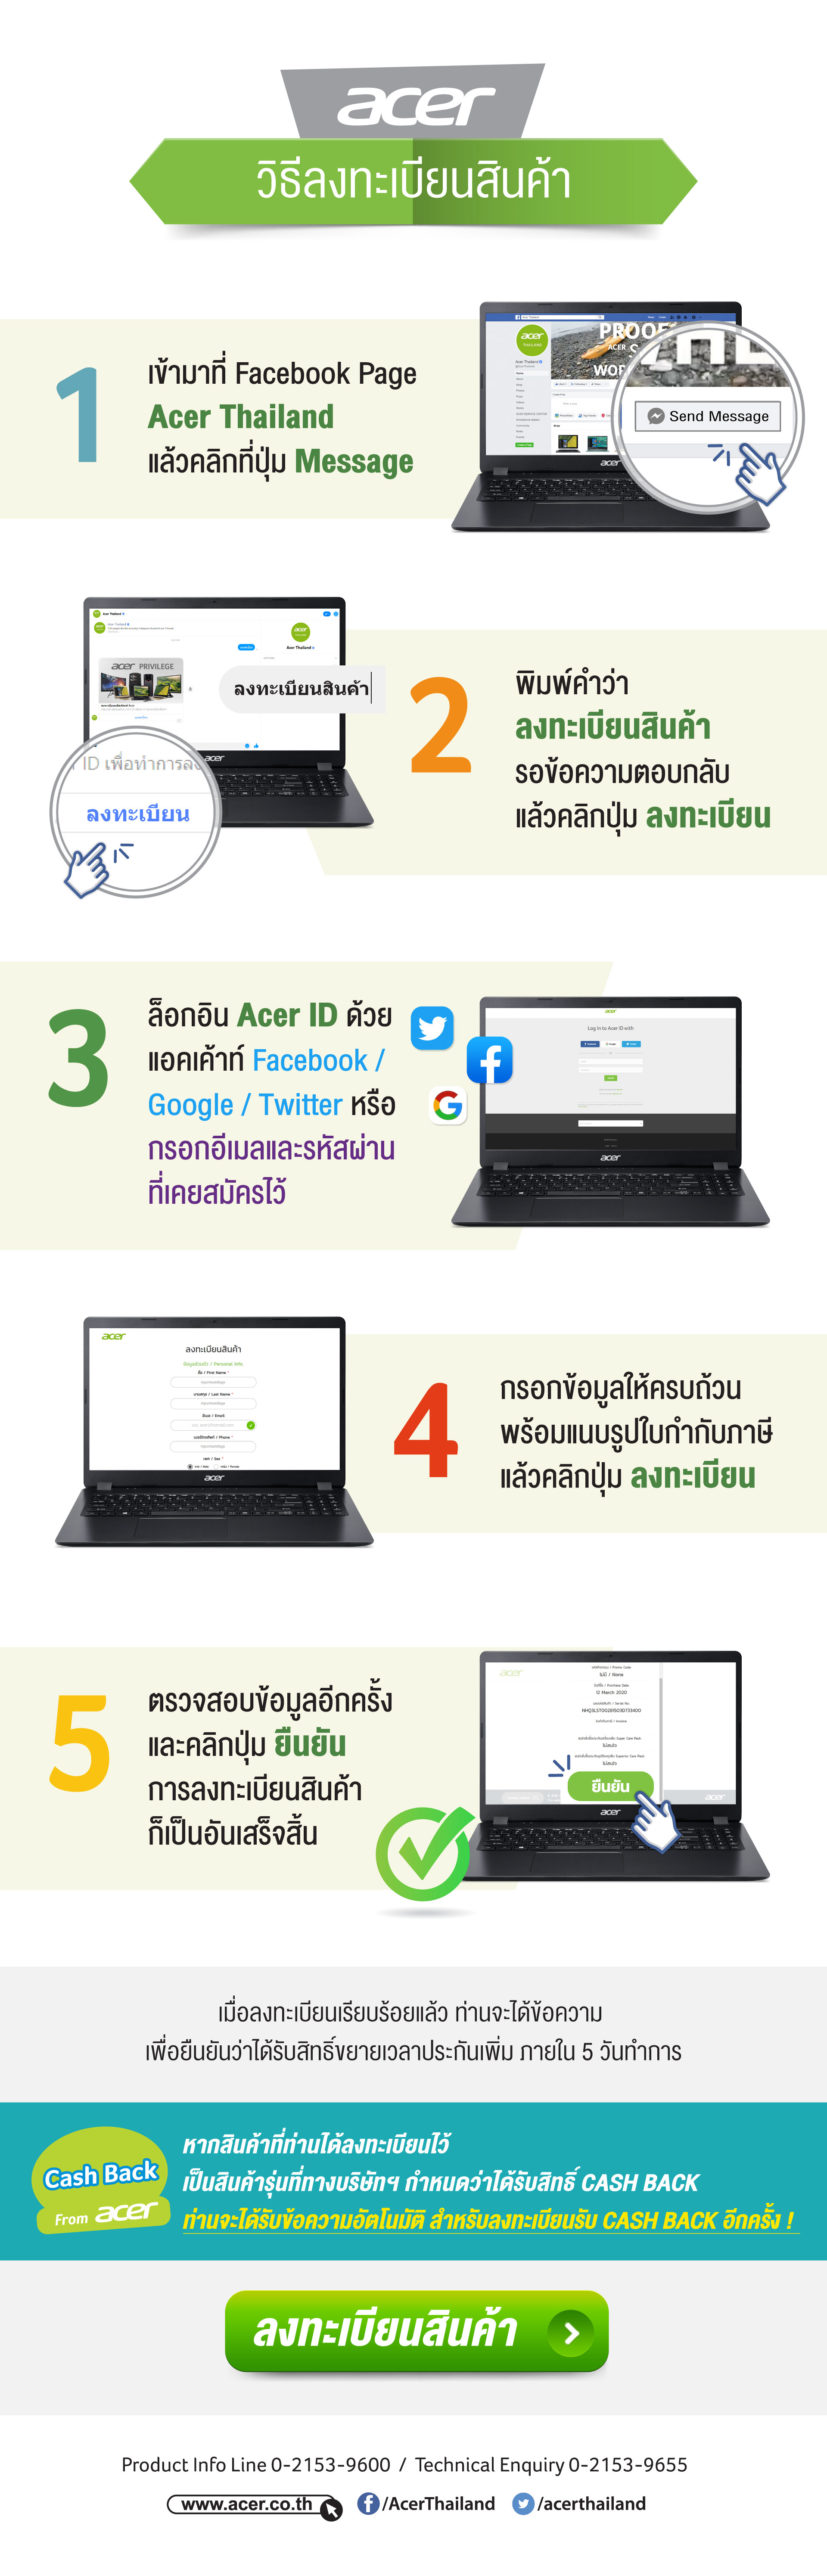 02Acer_How-to-register-product